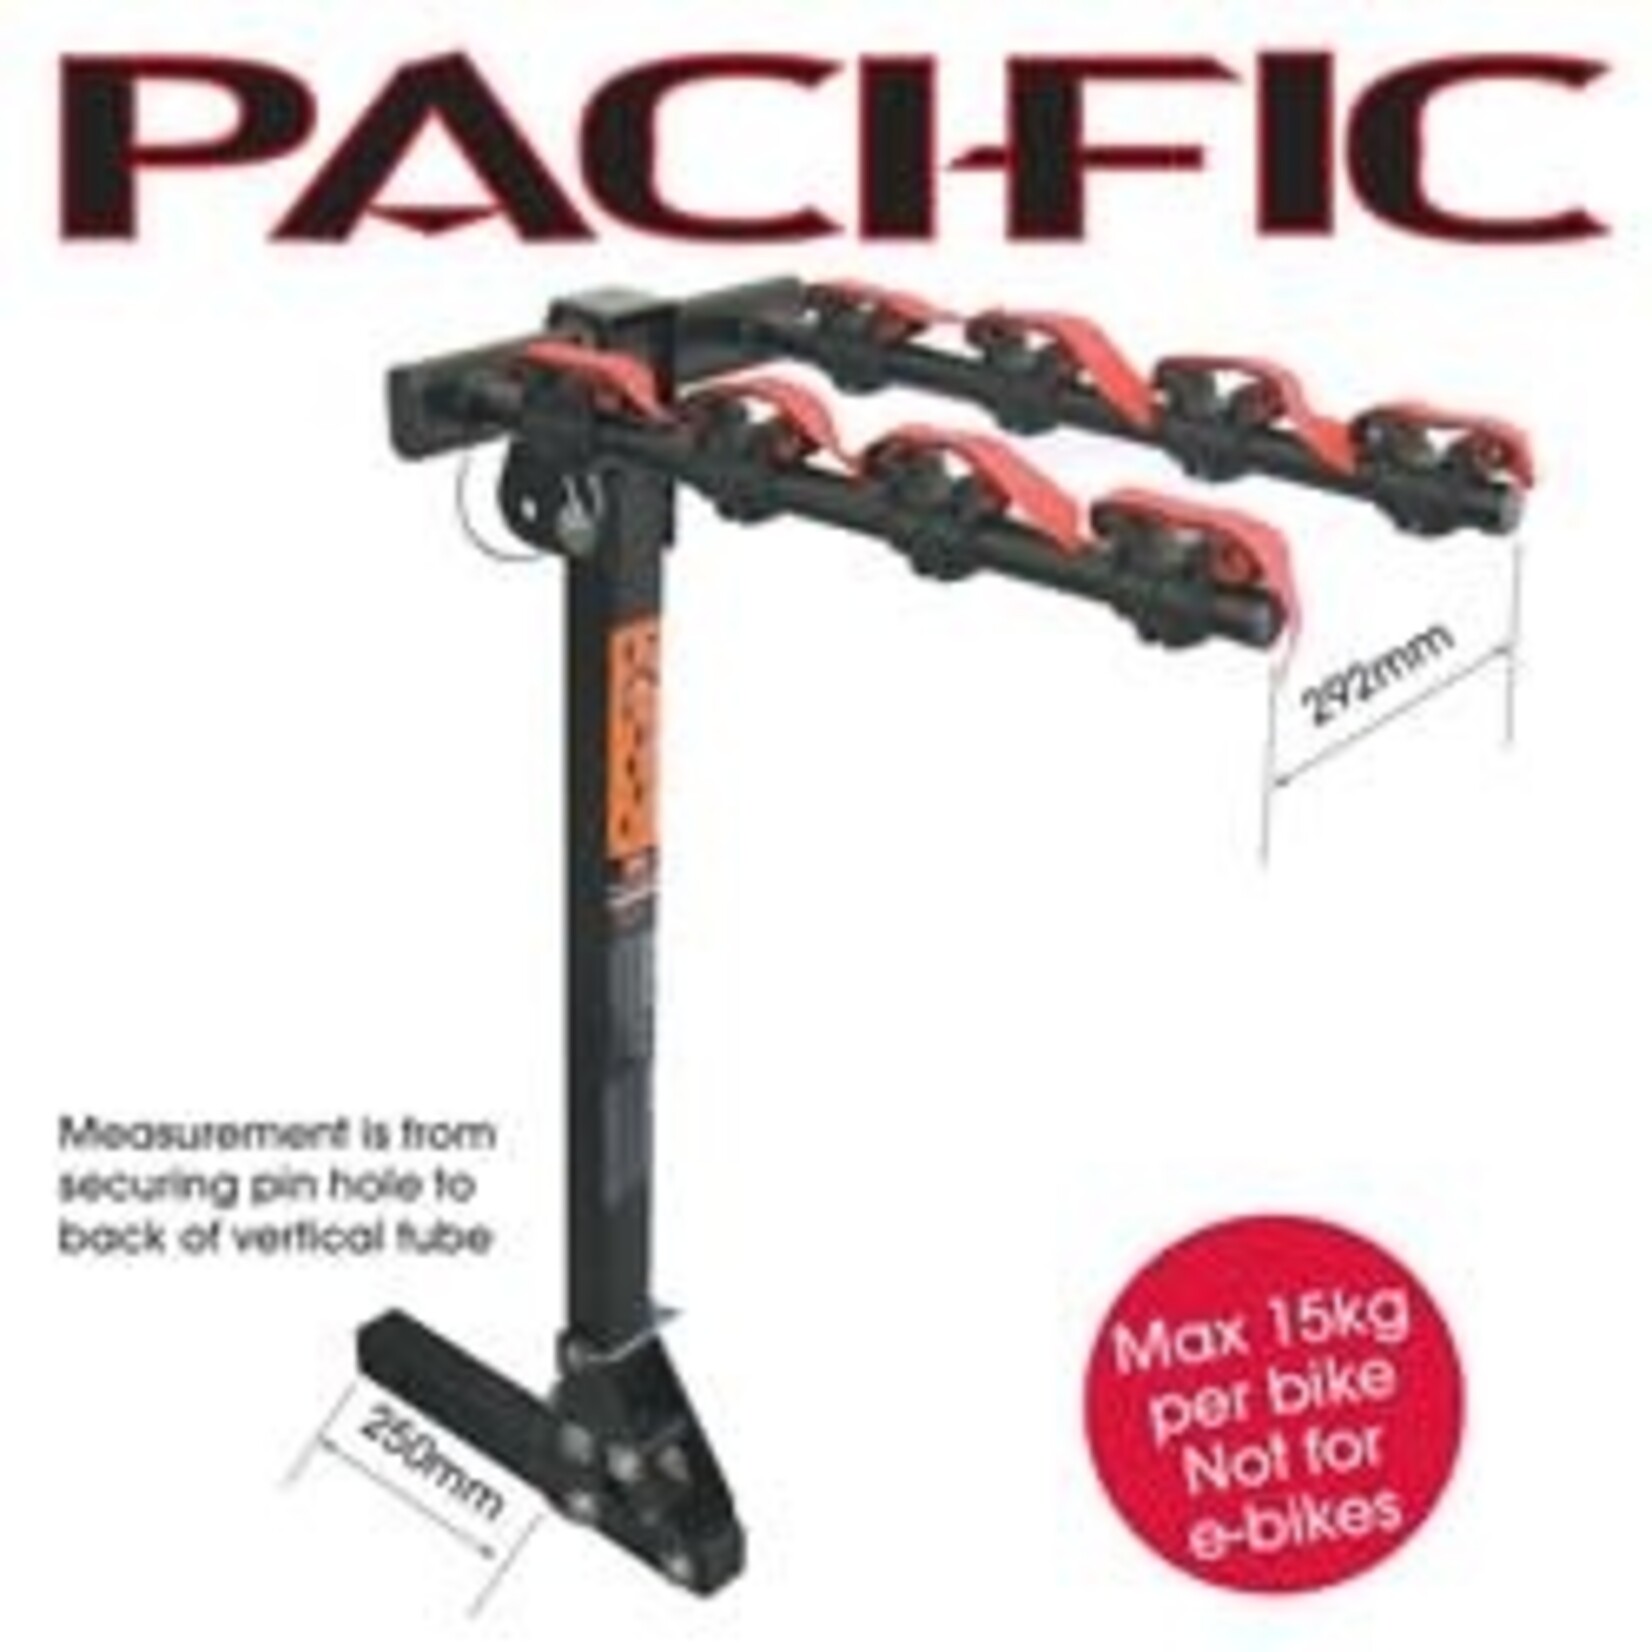 Pacific PACIFIC Bike Carriers